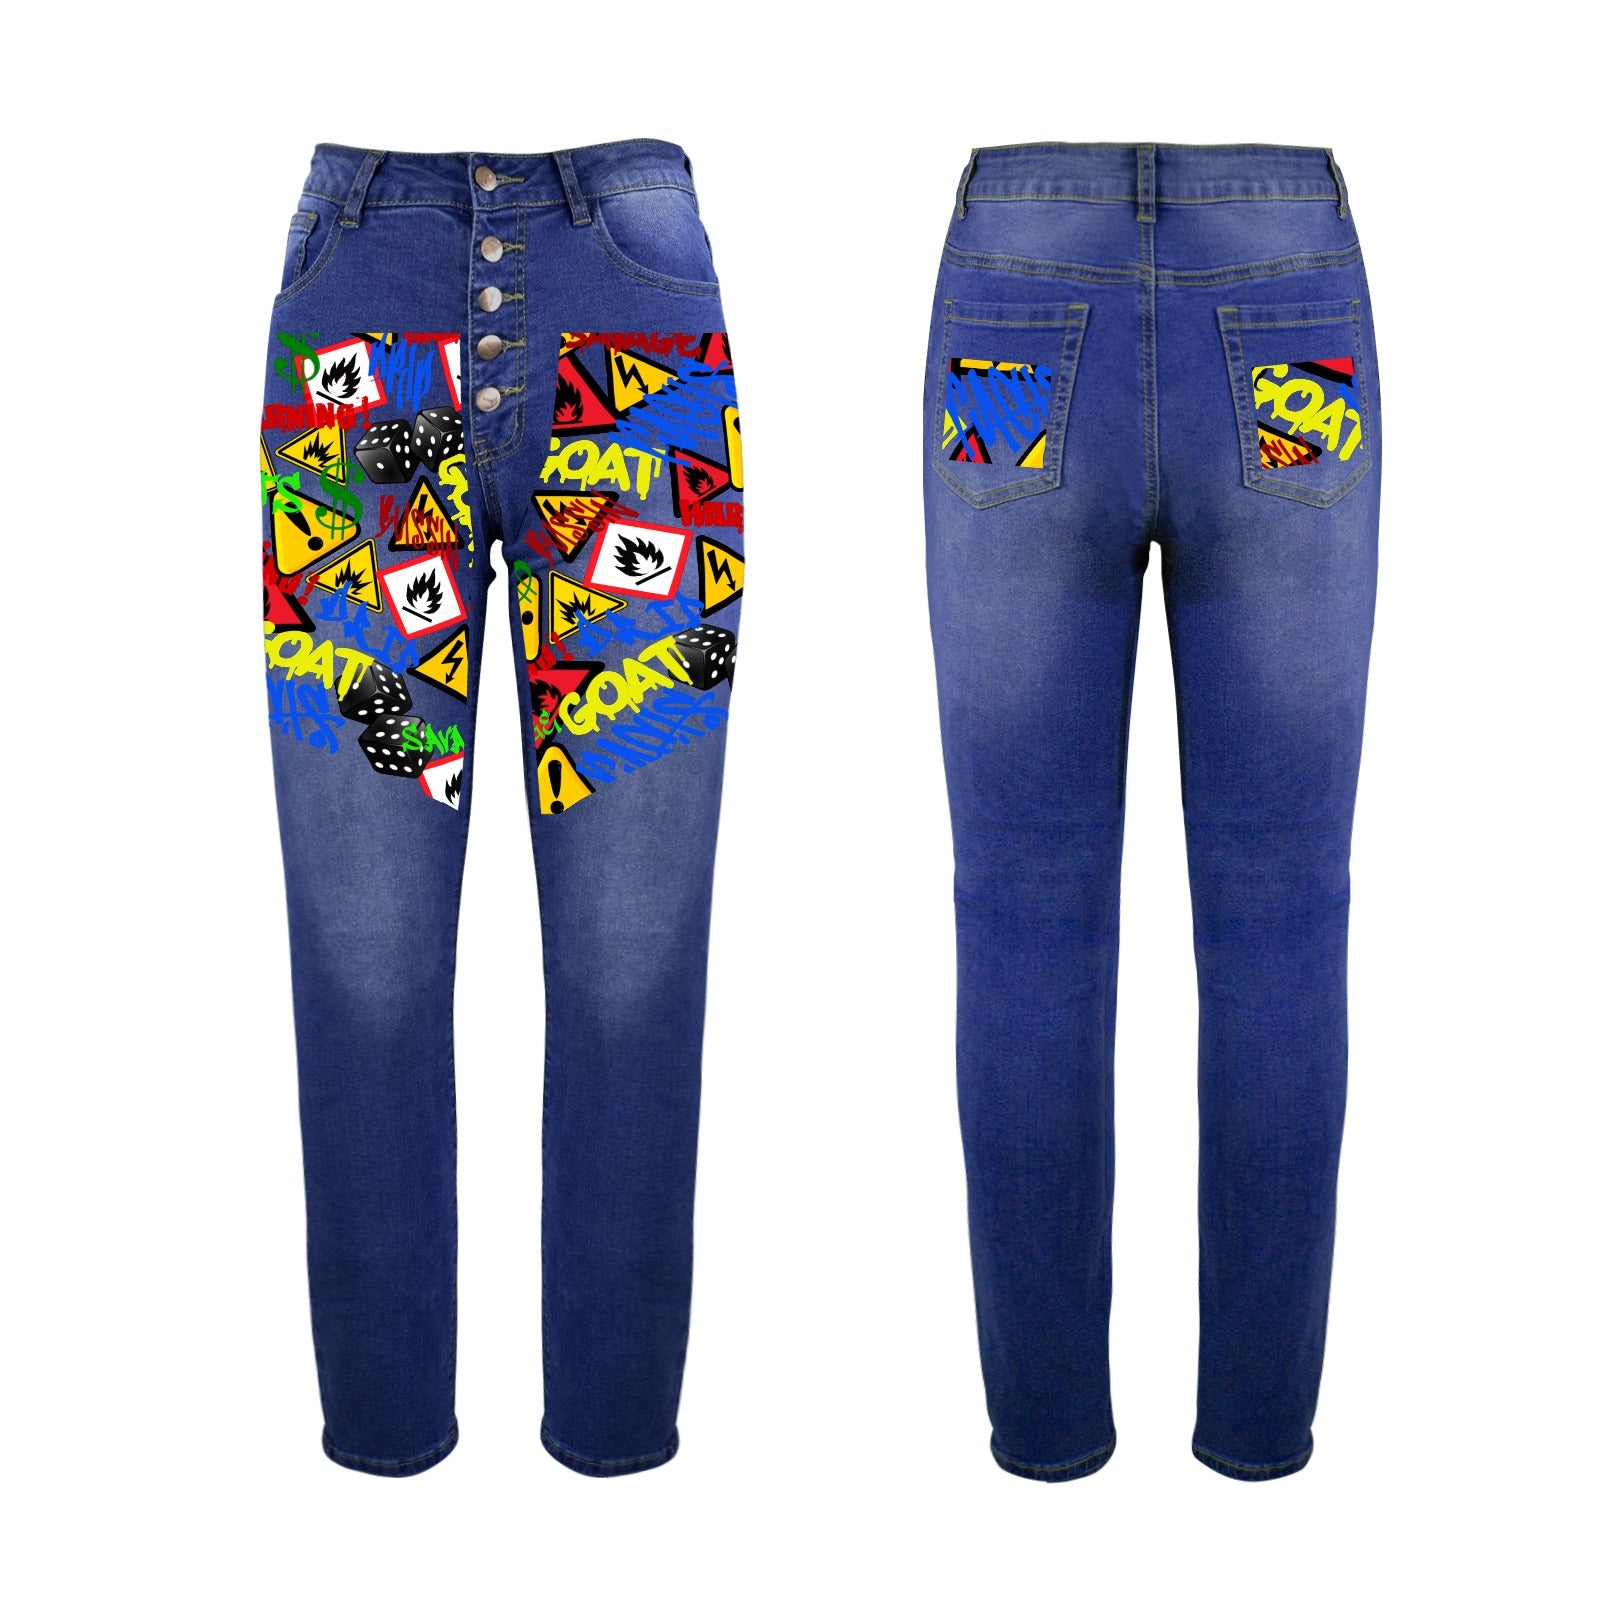 S - Hazard Women's Jeans - womens jeans at TFC&H Co.